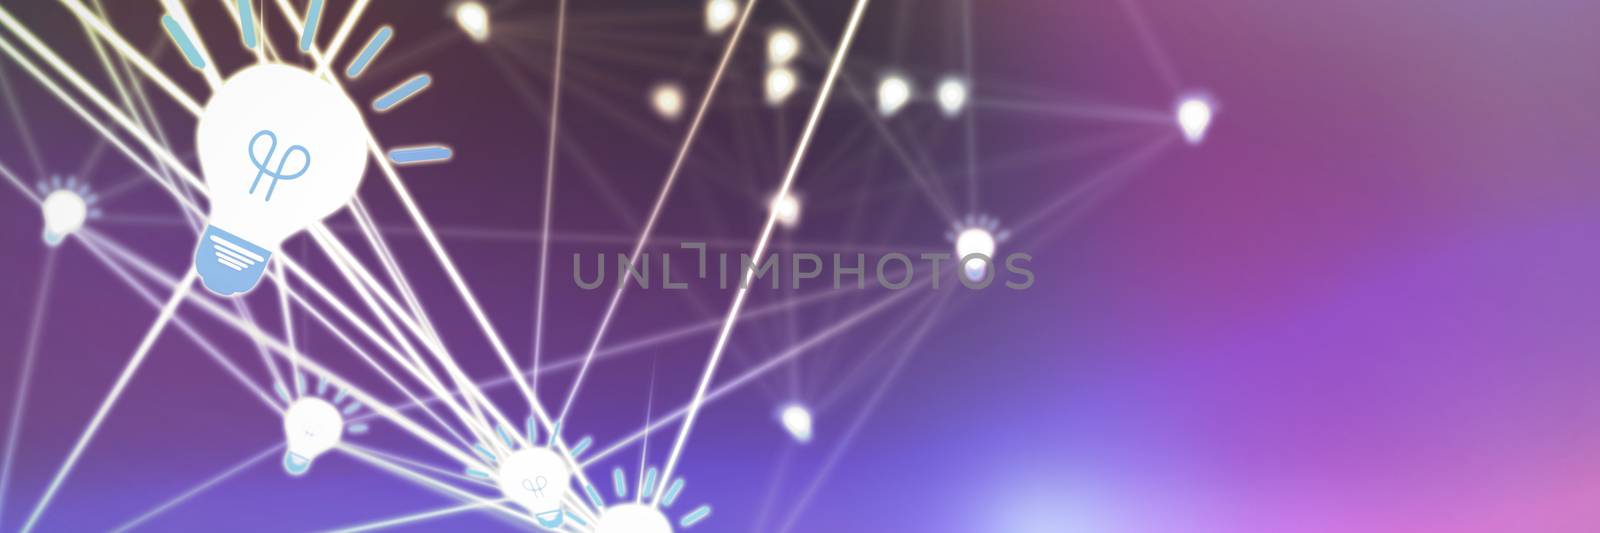 Abstract image of lightbulbs against pink and purple background